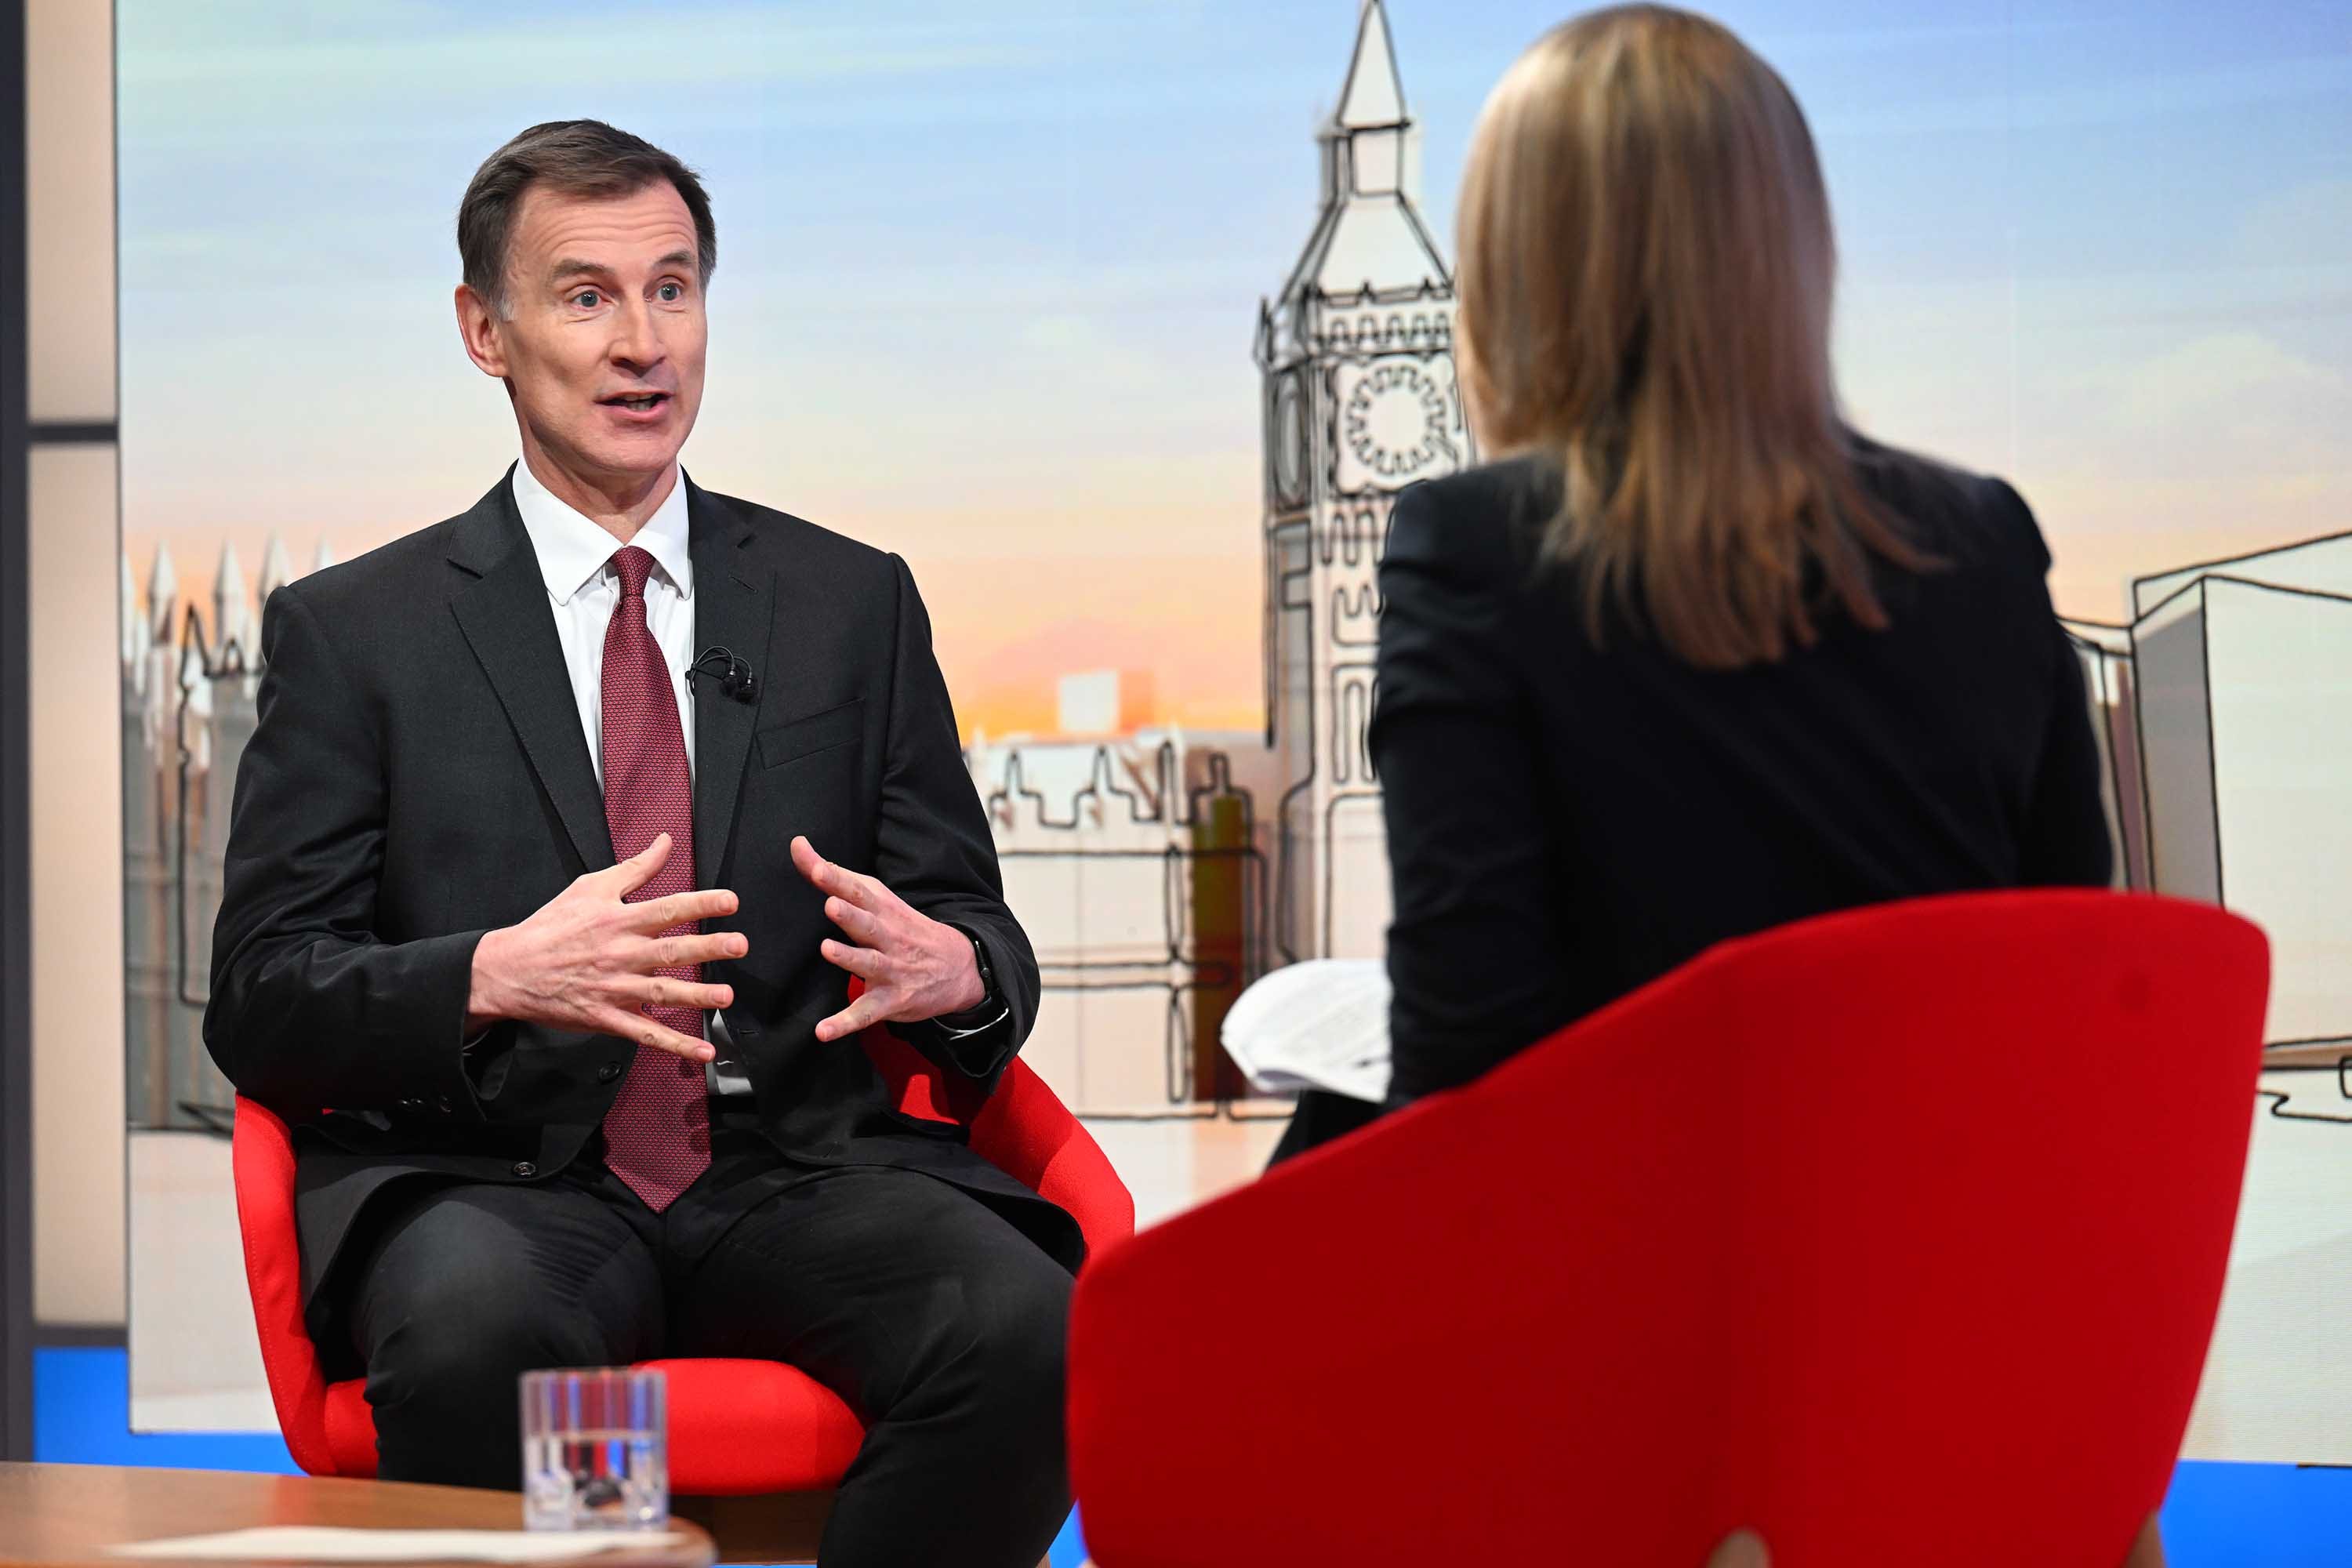 Jeremy Hunt refused to commit to compensation for Waspi women when questioned on the BBC